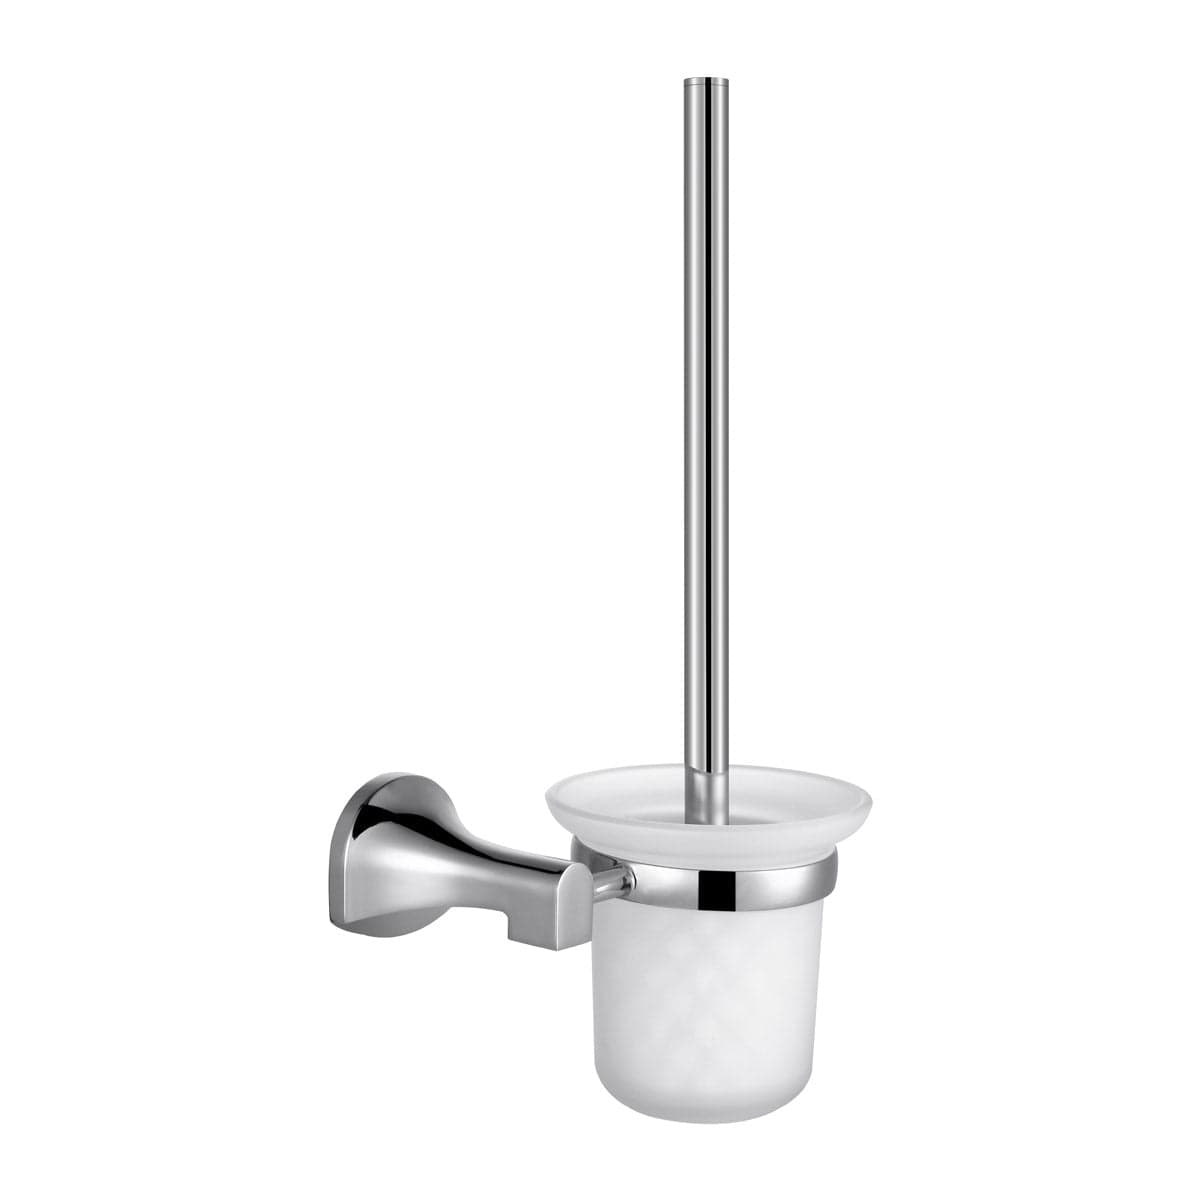 Buy Bathroom Stainless Steel Wall-Mounted Toilet Brush with Frosted Glass Jar - L1057 | Shop at Supply Master Accra, Ghana Bathroom Accessories Buy Tools hardware Building materials